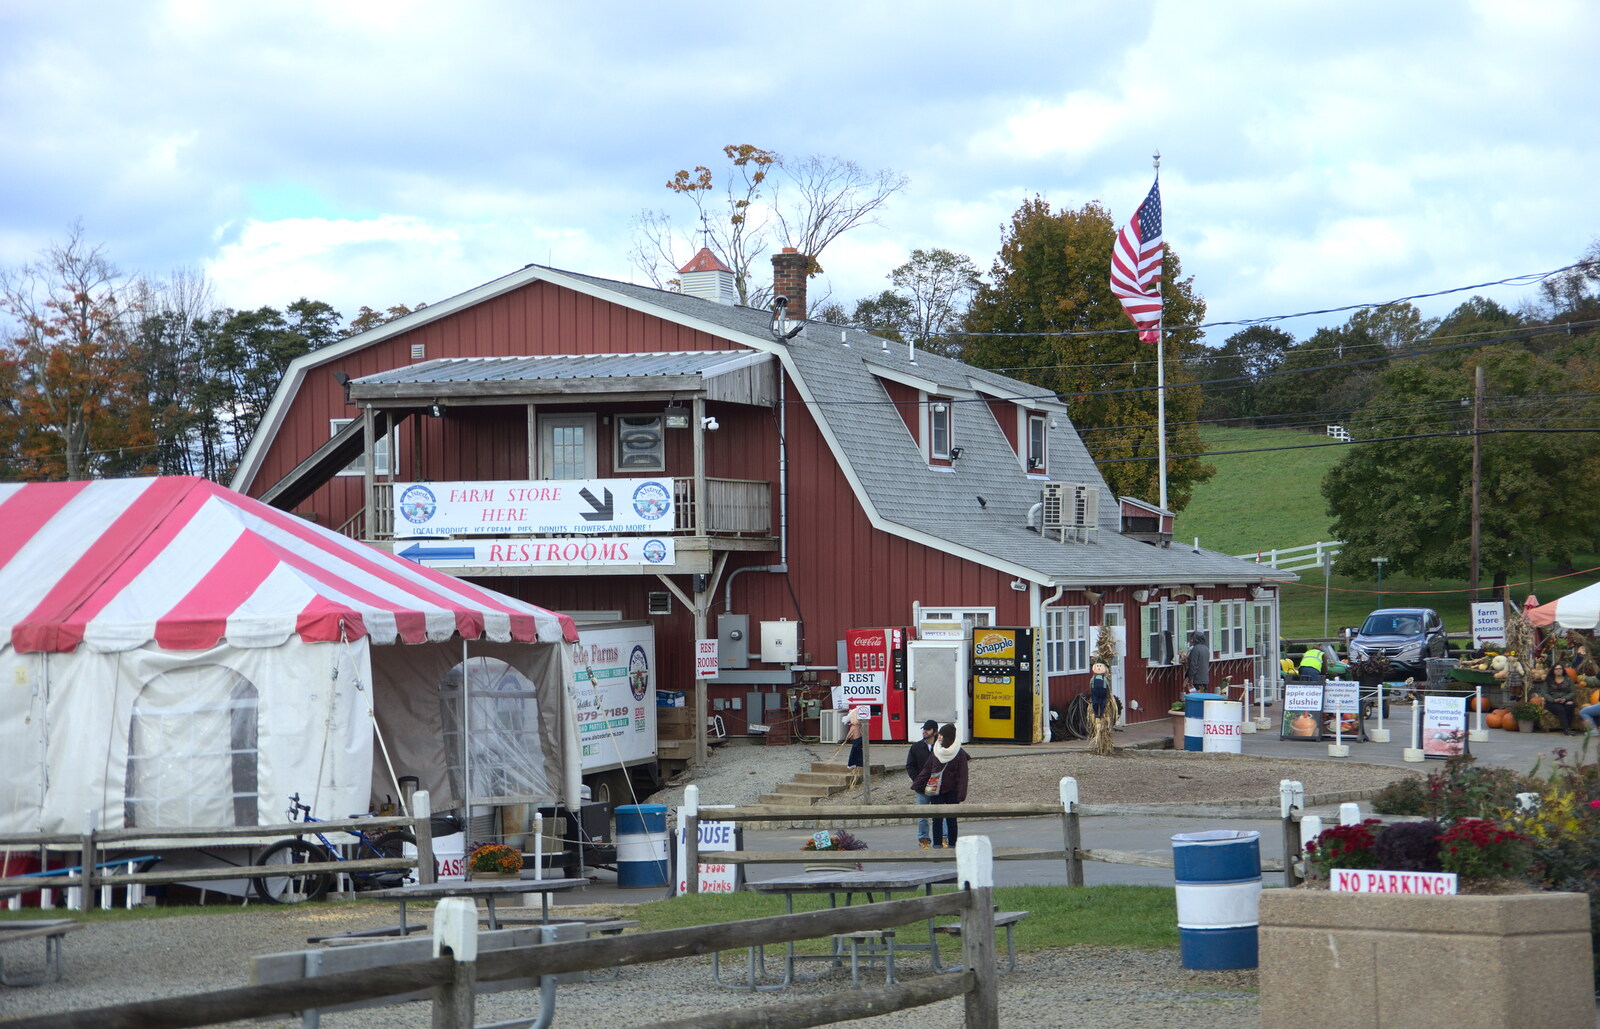 Alstede Farm from Pumpkin Picking at Alstede Farm, Chester, Morris County, New Jersey - 24th October 2018